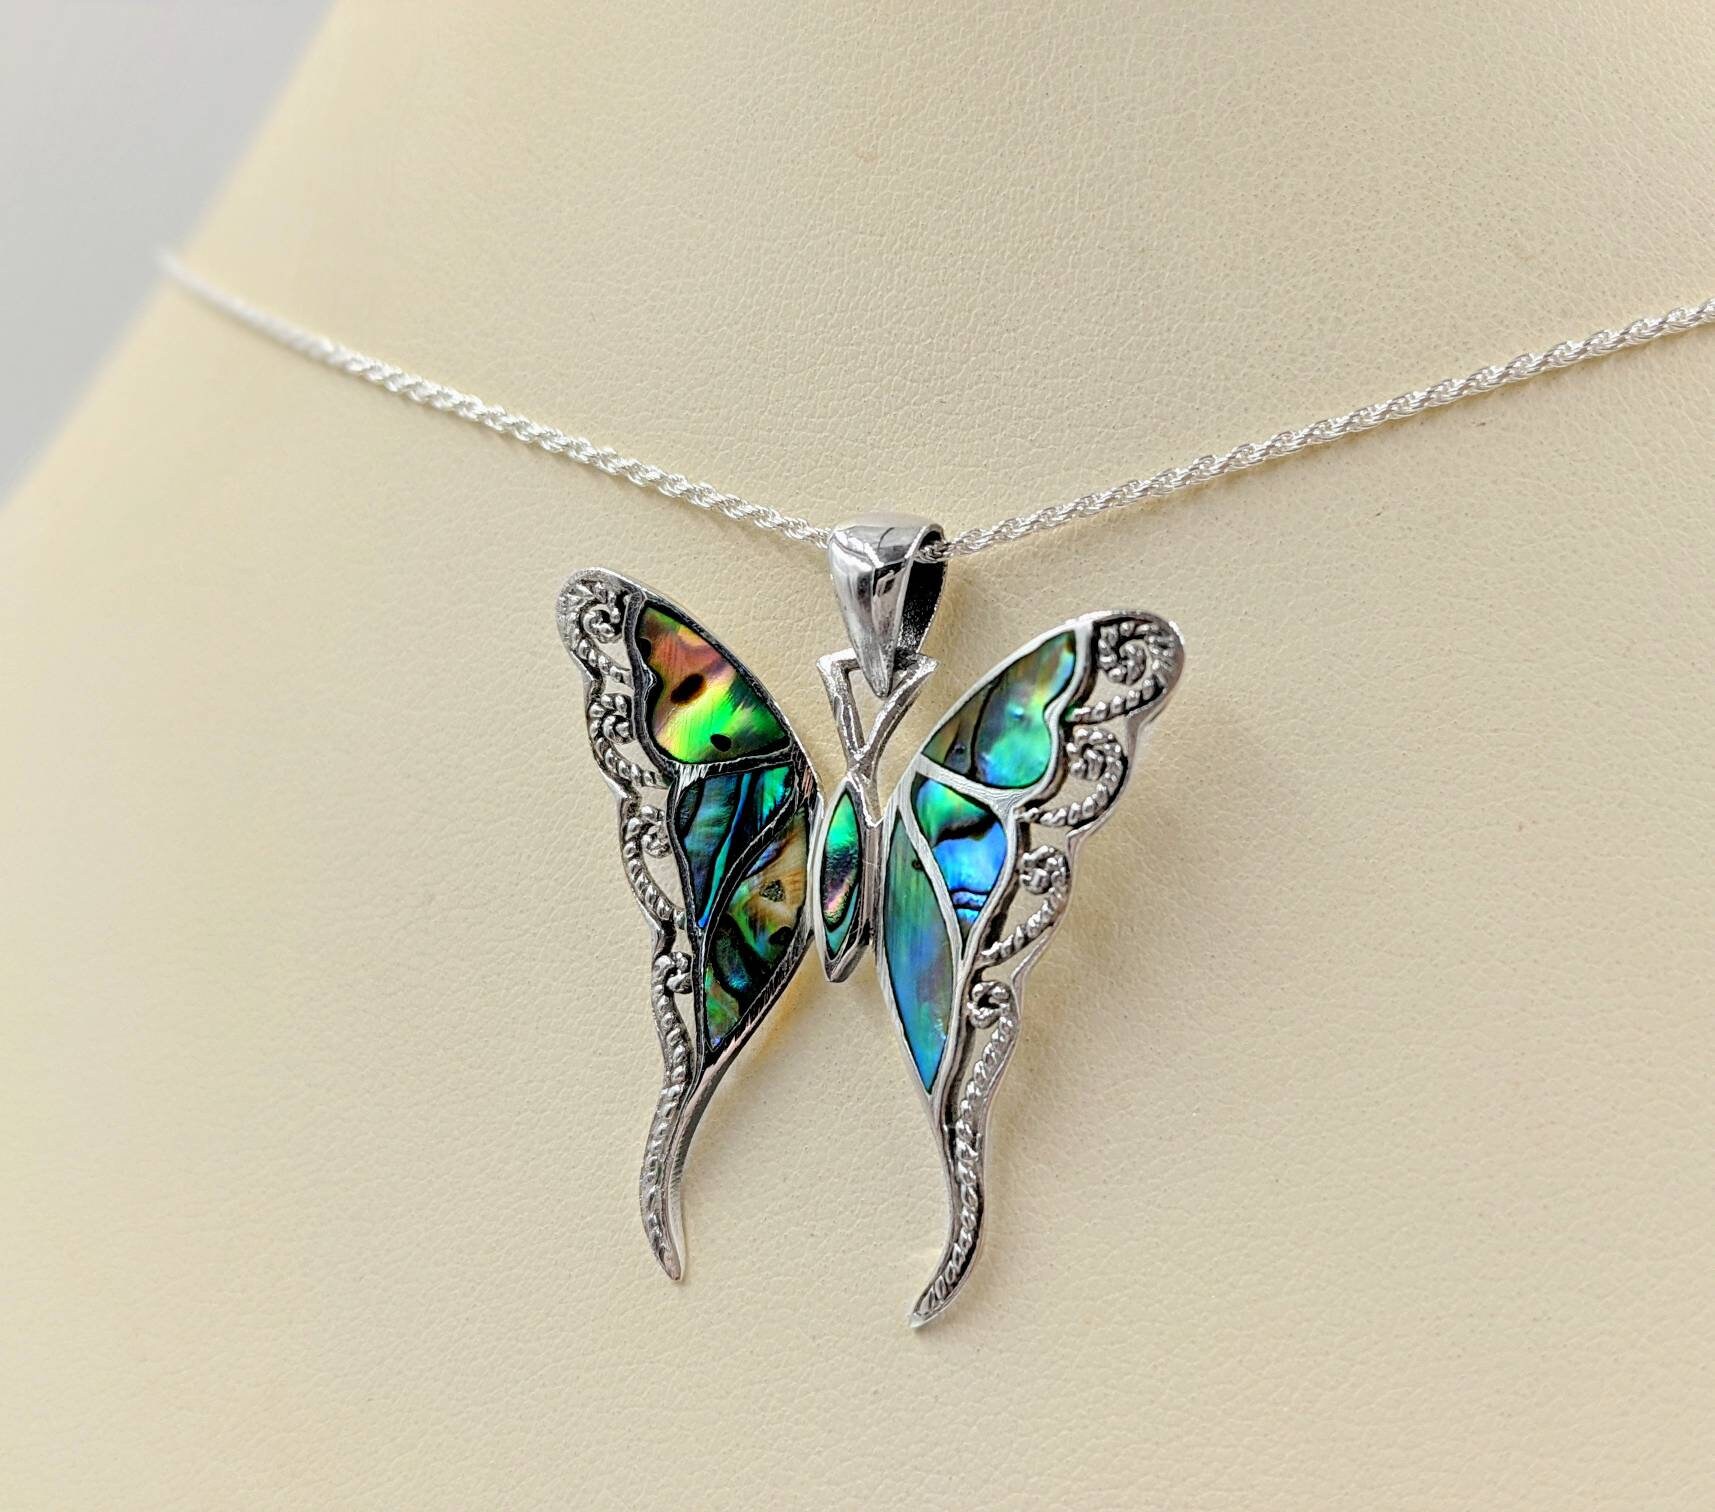 Elegant Sterling Silver Filigree & Sparkle-Cut Butterfly Charm Pendant Necklace